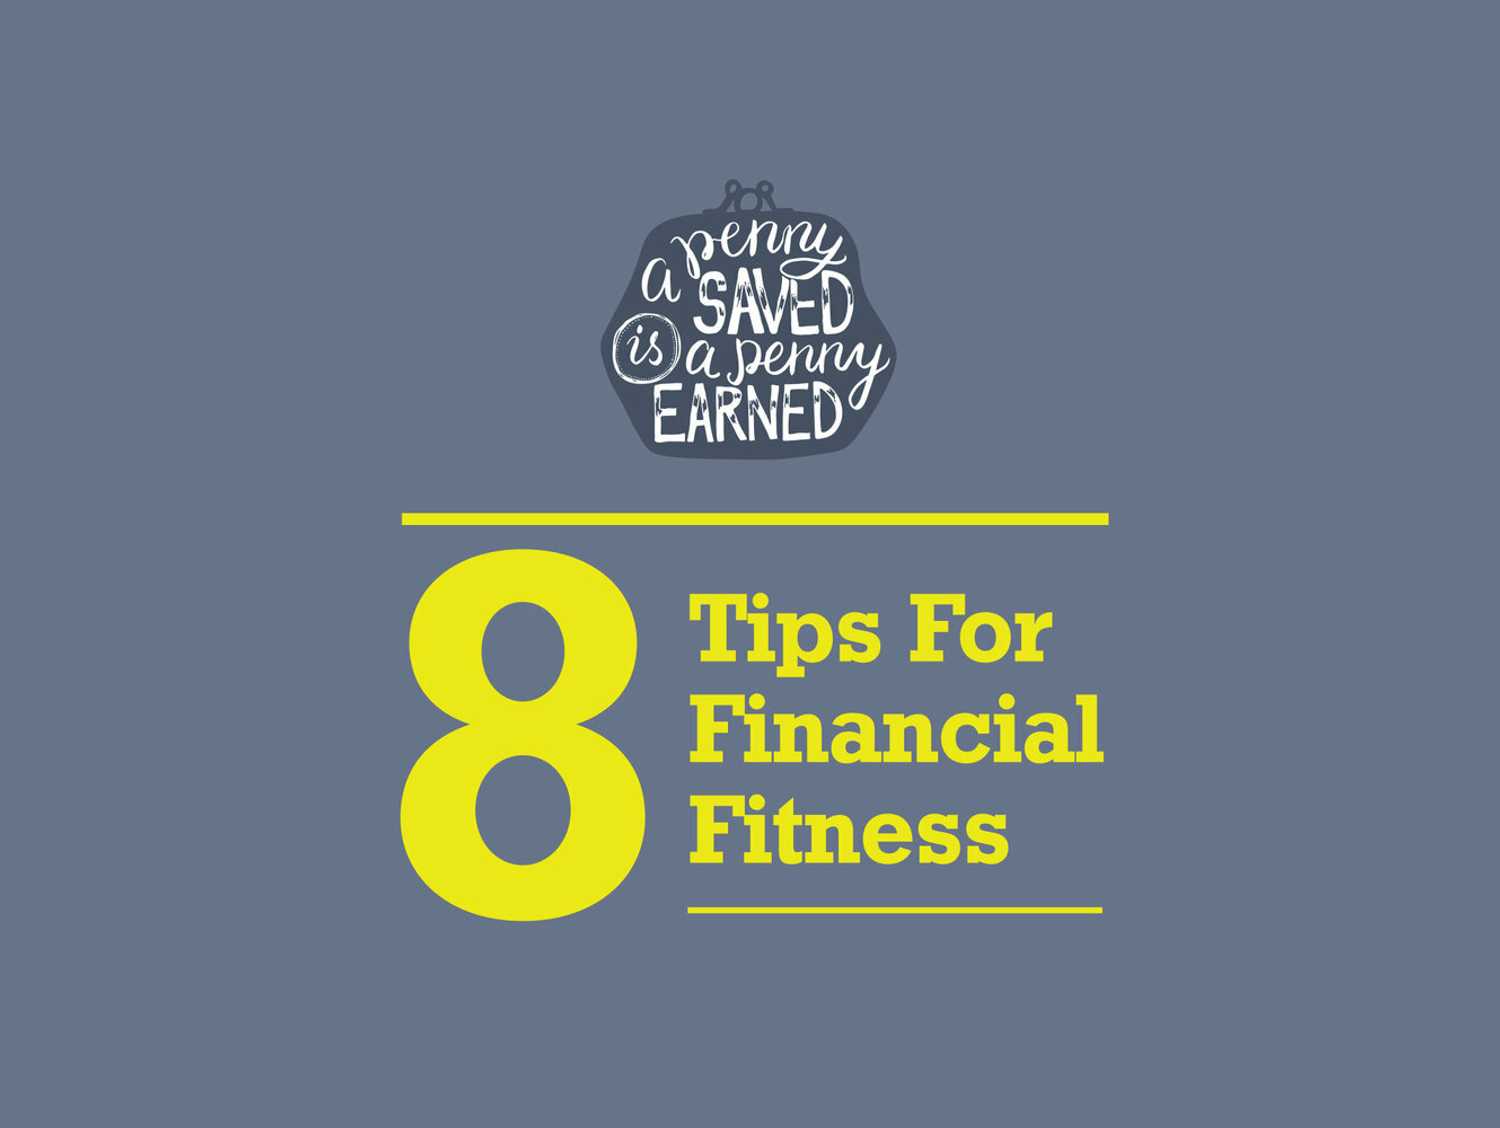 A Penny Saved Is A Penny Earned: 8 Tips For Financial Fitness